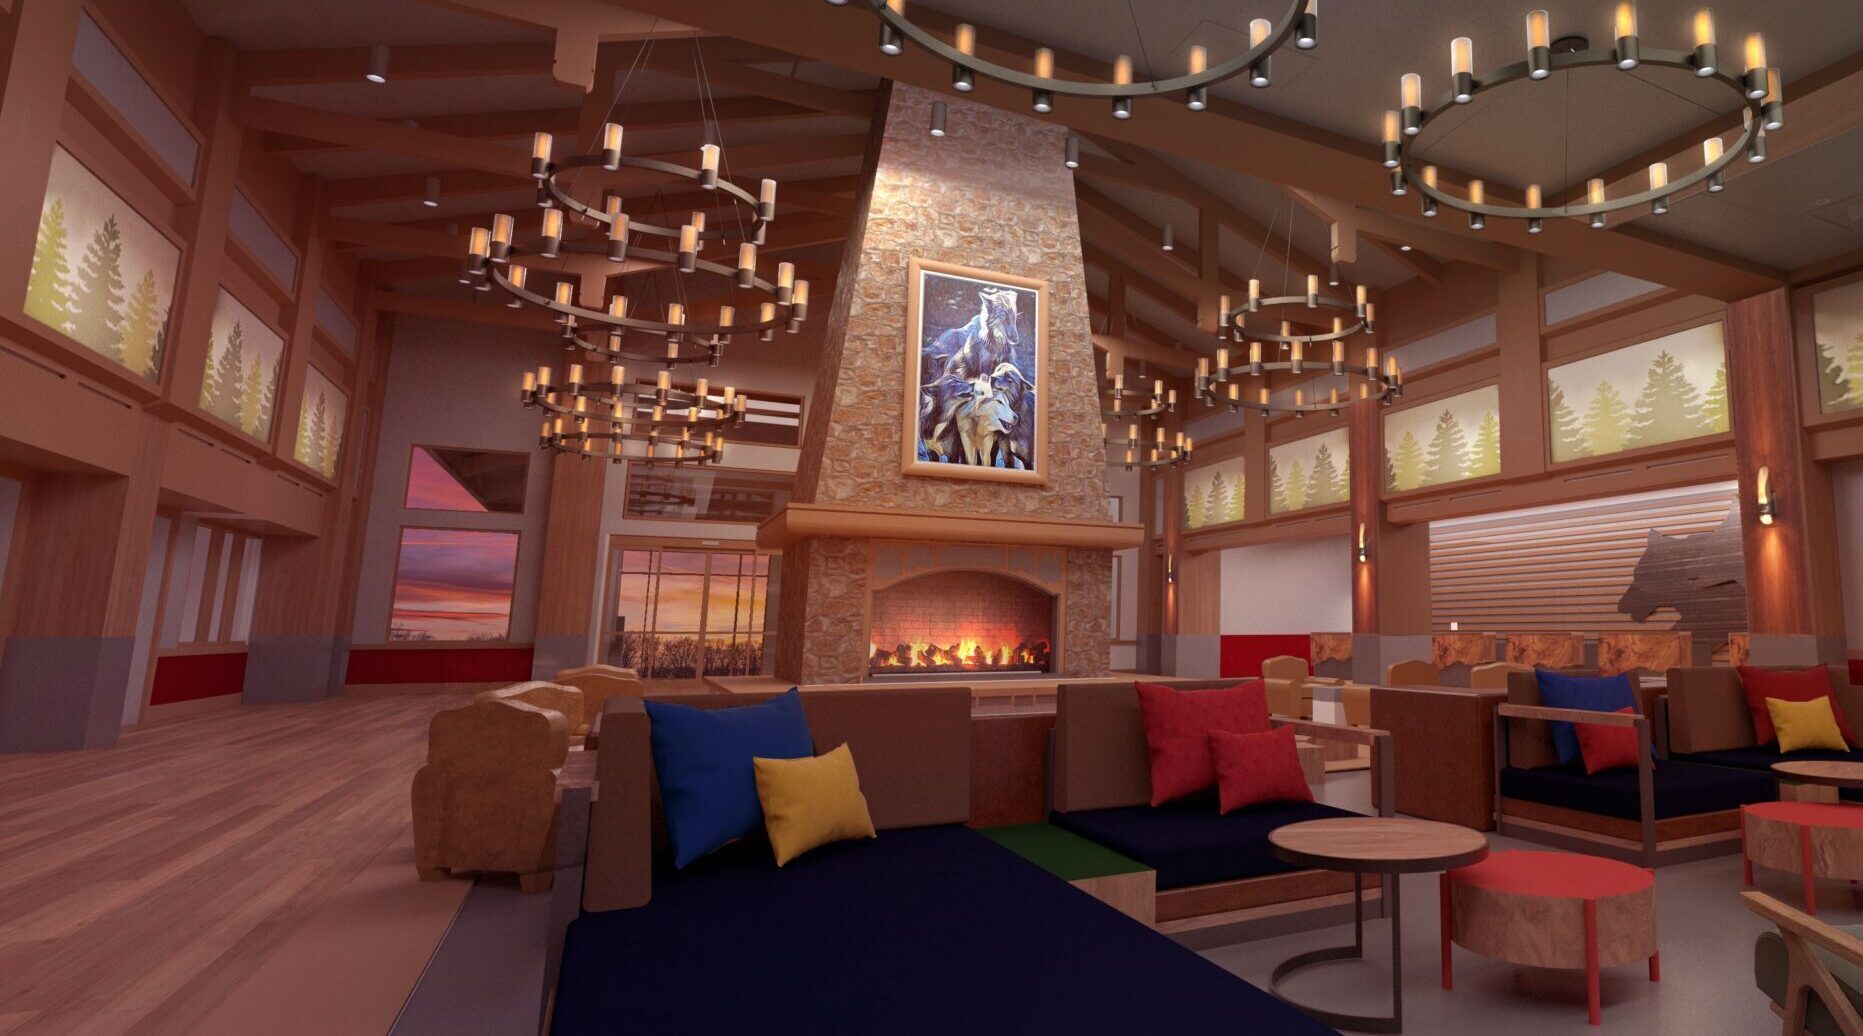 Ten eateries, like Fireside, an upscale restaurant, and Buckets, a more casual spot, are set to provide diverse dining options at Great Wolf Lodge in Webster.